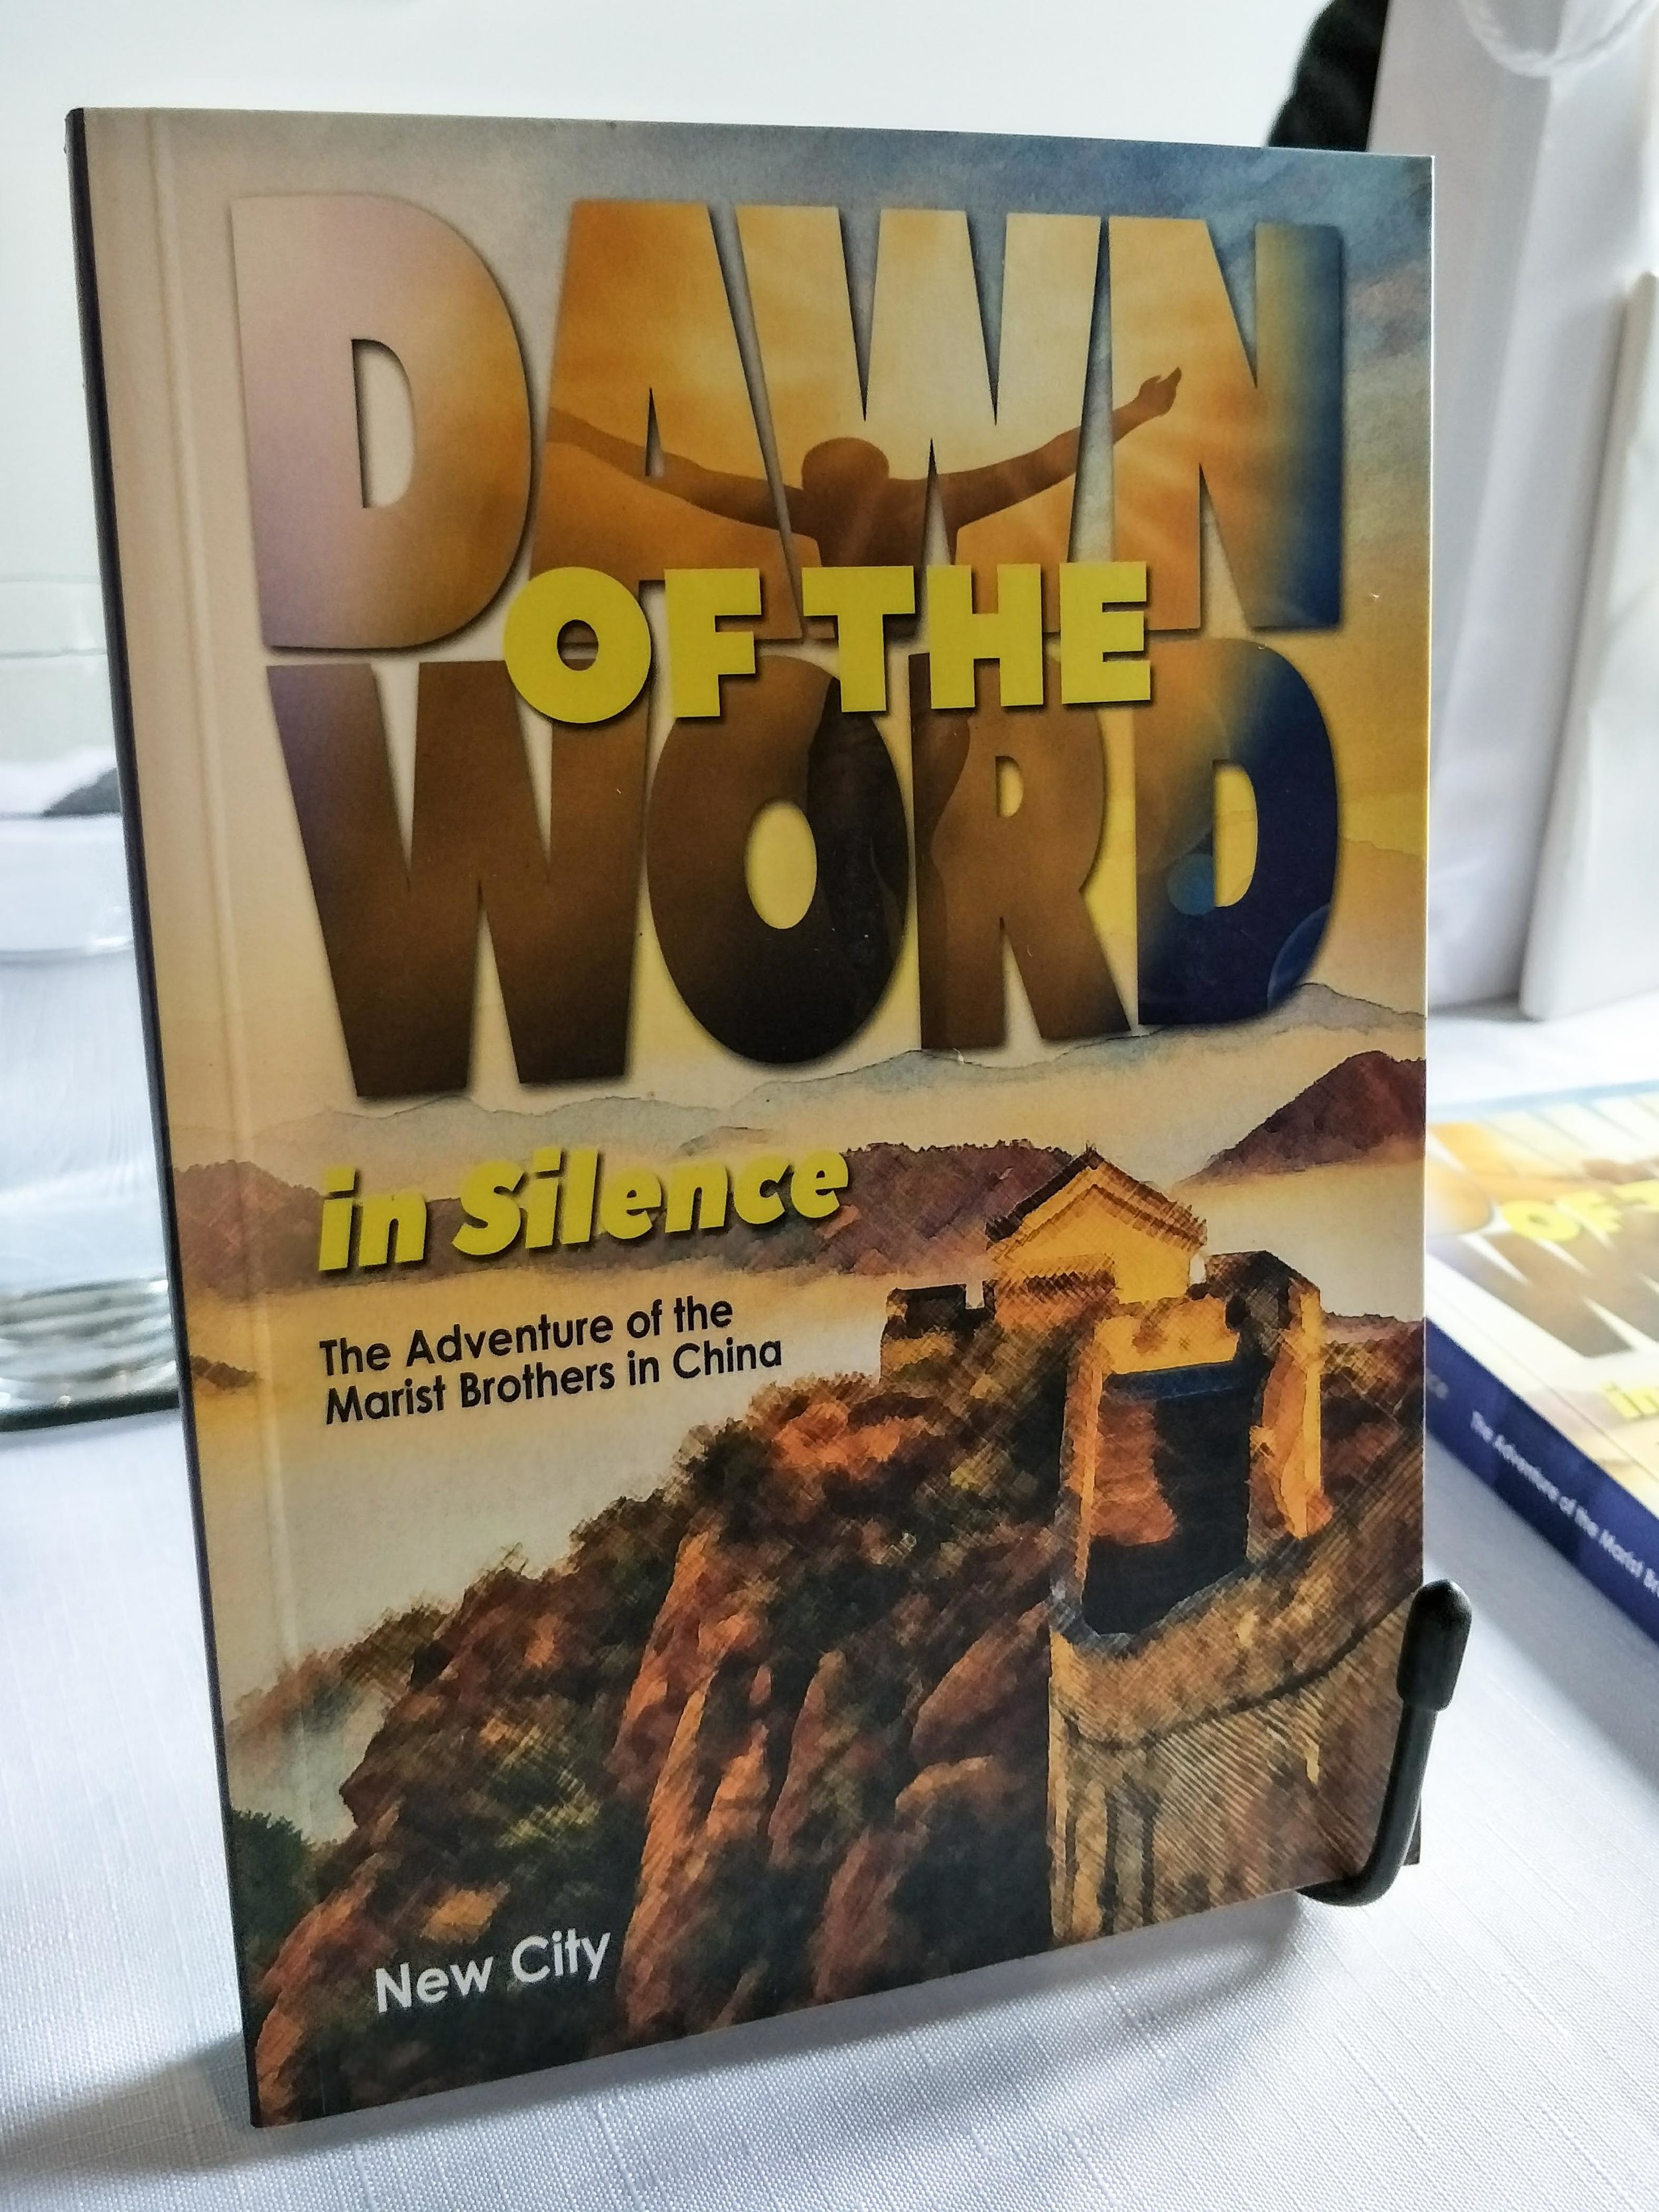 Dawn of the Word